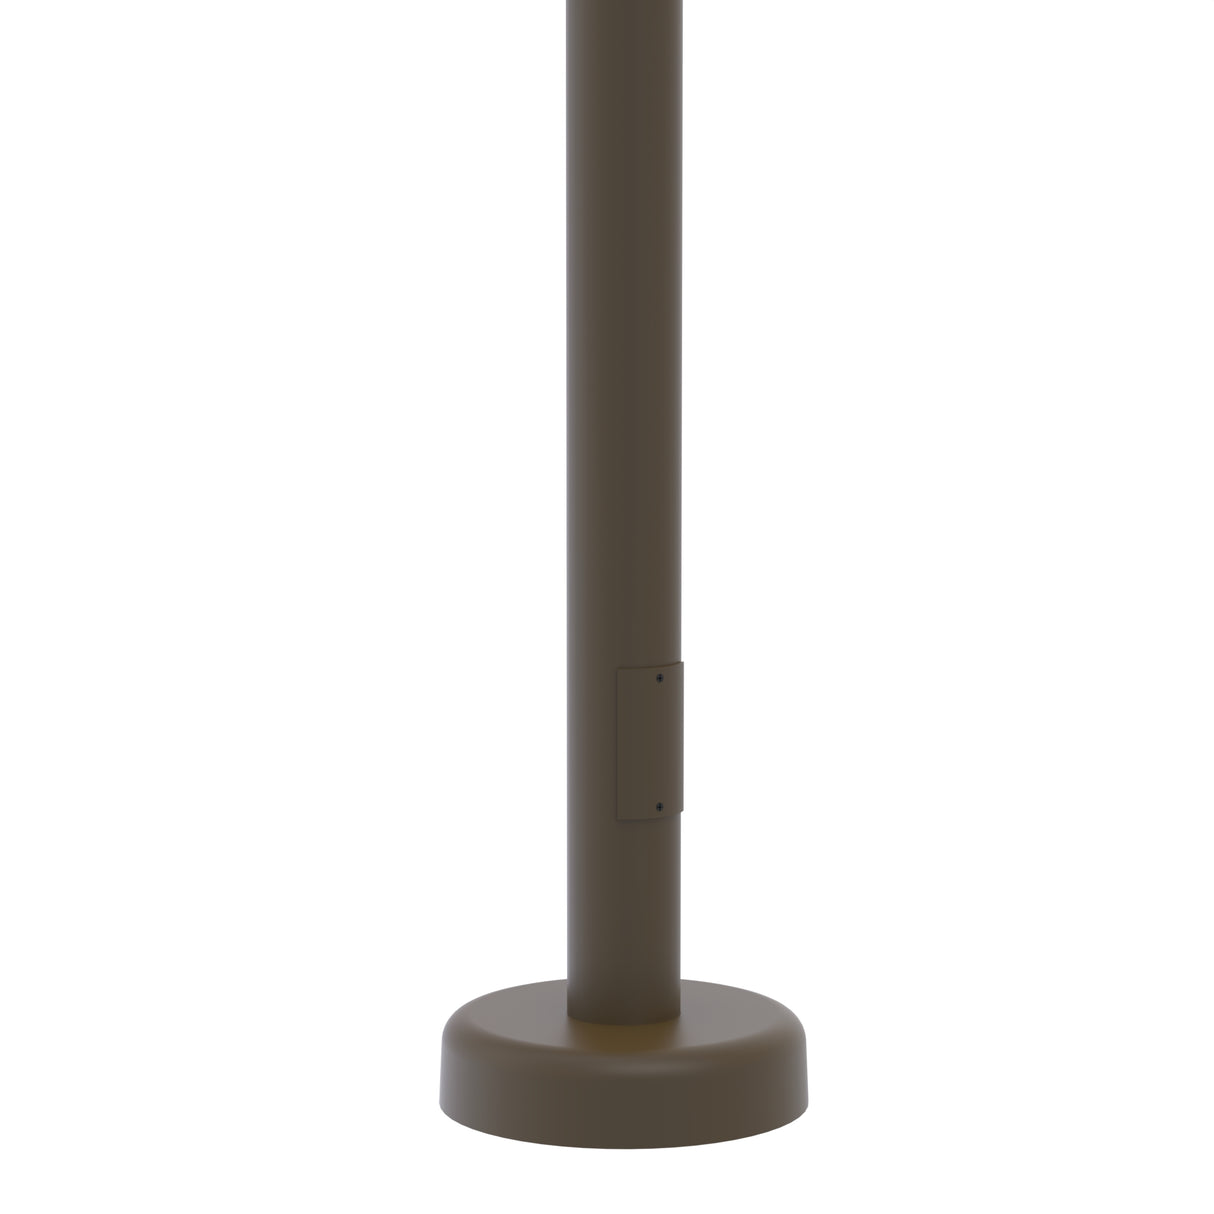 20' Tall x 5.0" OD x 0.188" Thick, Round Straight Aluminum, Hinged Anchor Base Light Pole